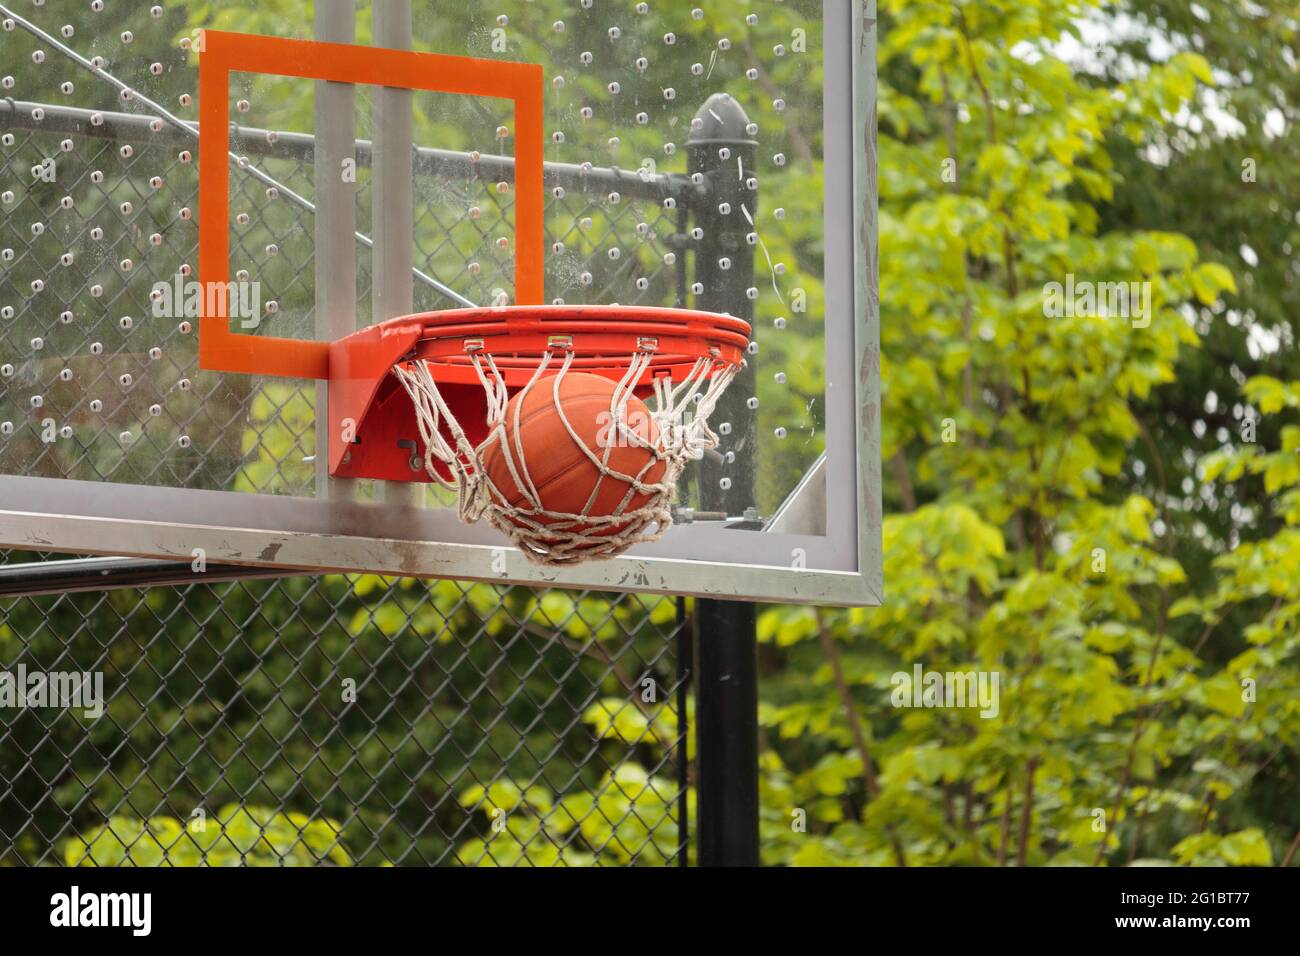 close up of a basketball going through the net of the basketball hoop with glass backboard visible and trees in background, a score in basketball game Stock Photo